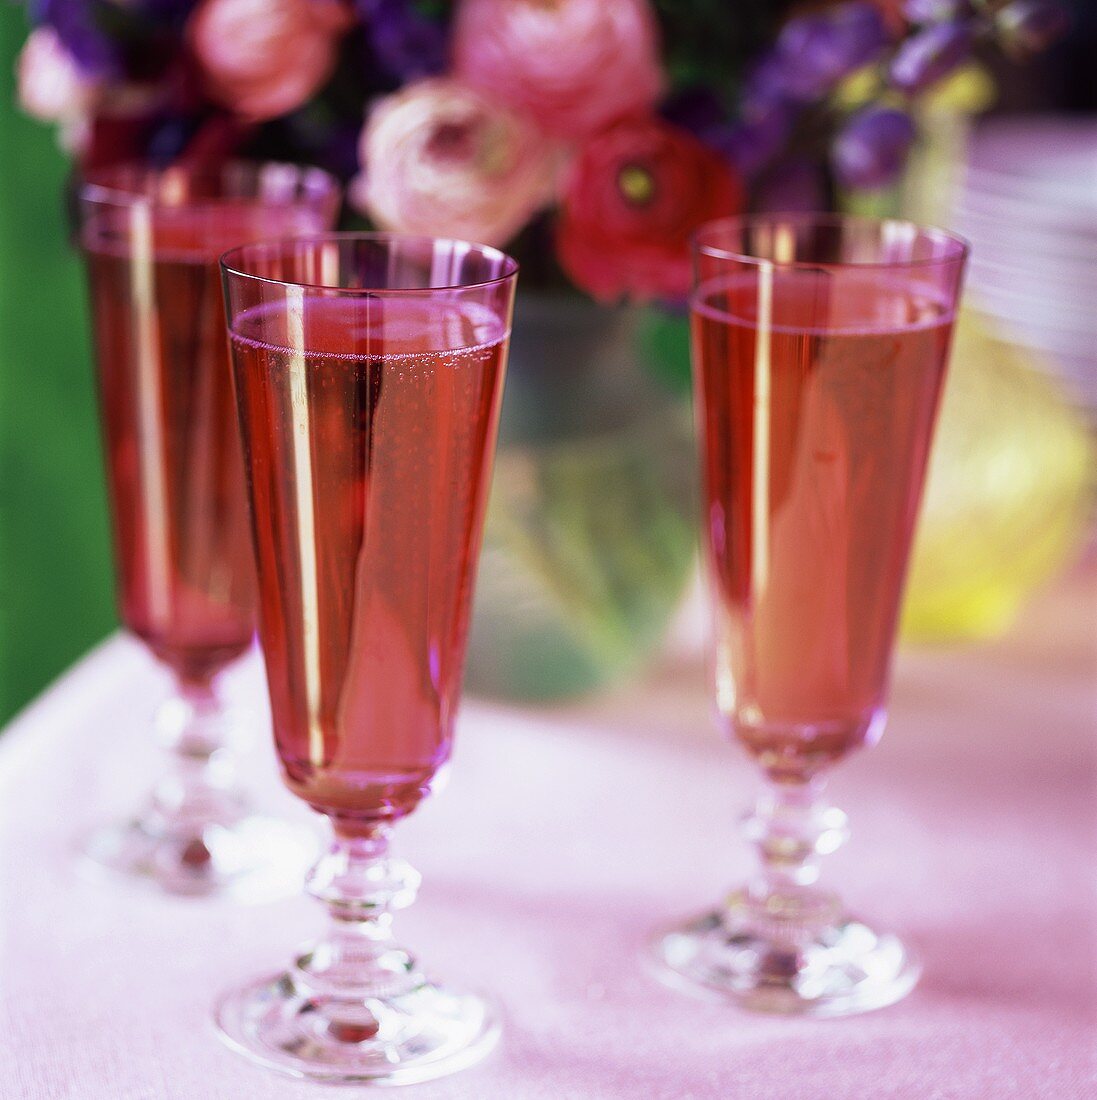 Three glasses of pink sparkling wine in front of flowers